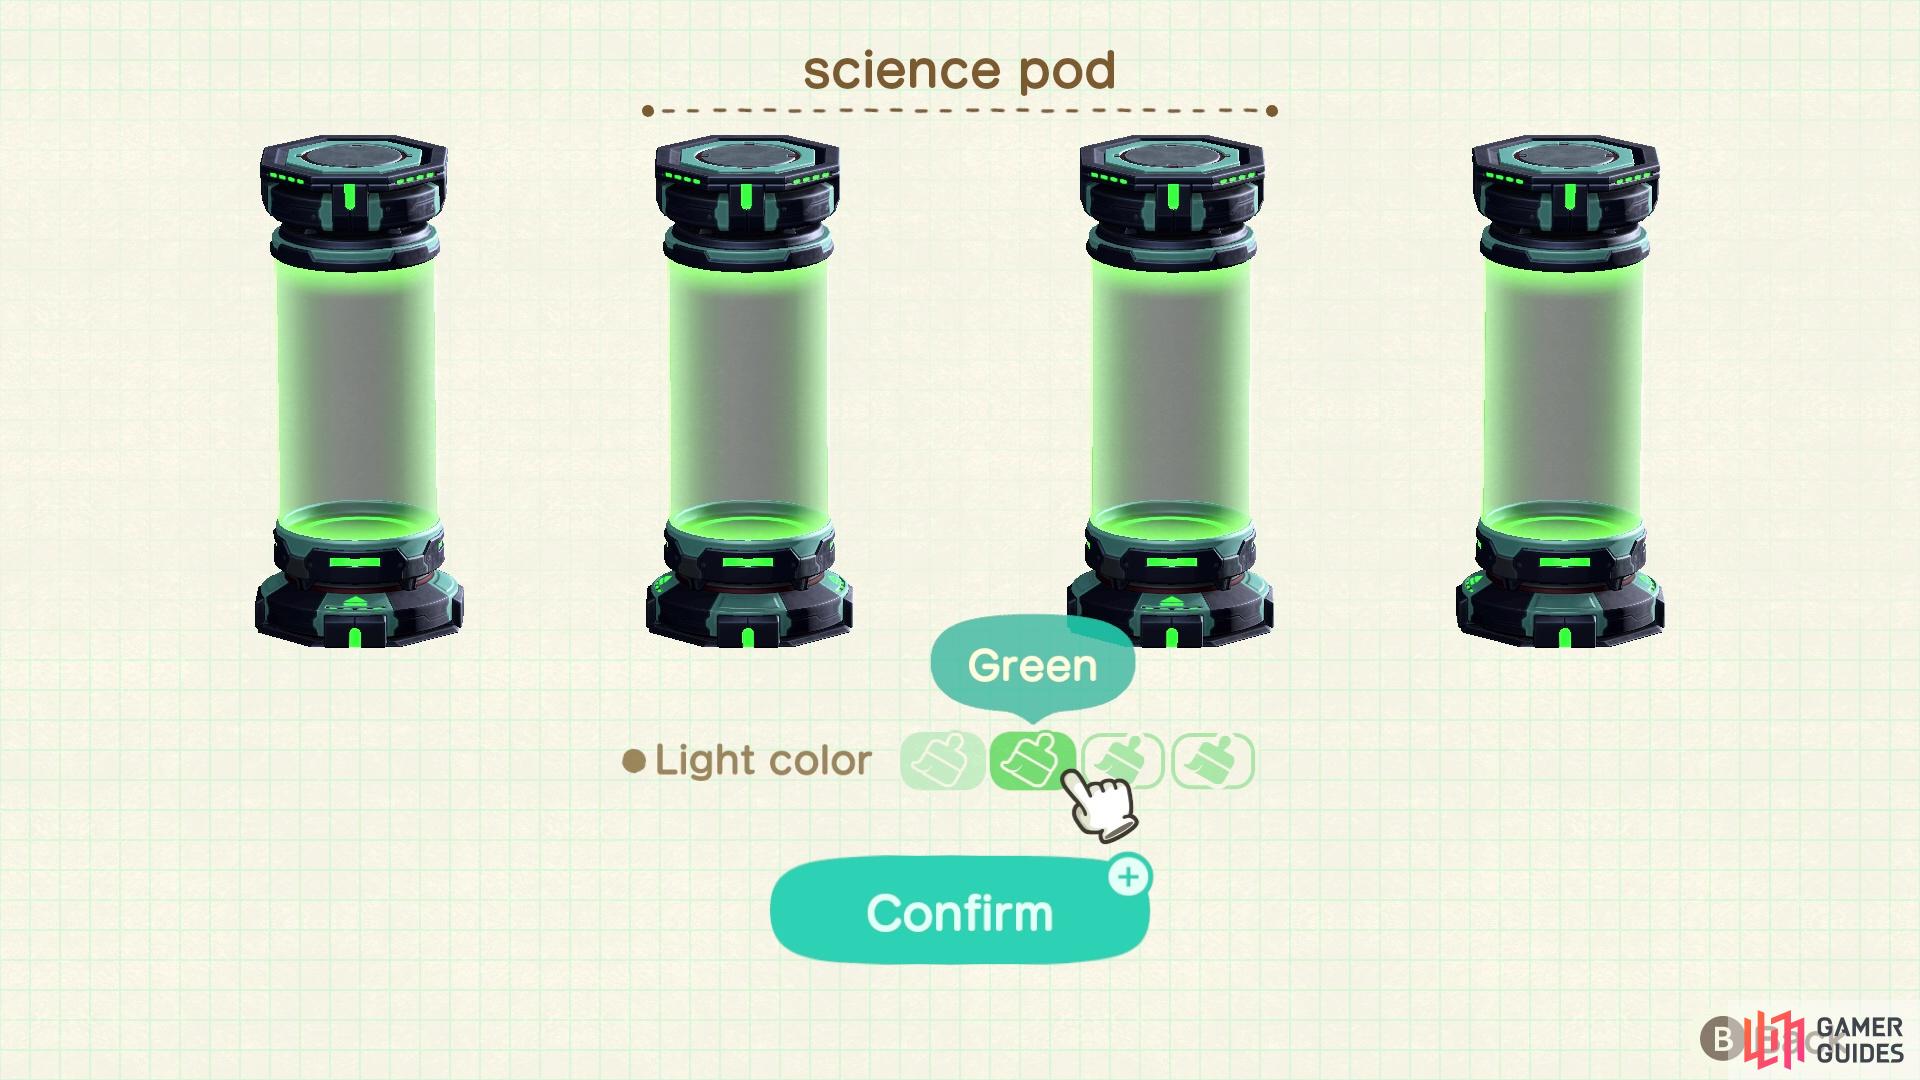 The Science Pod can be changed to hold different colored liquids.